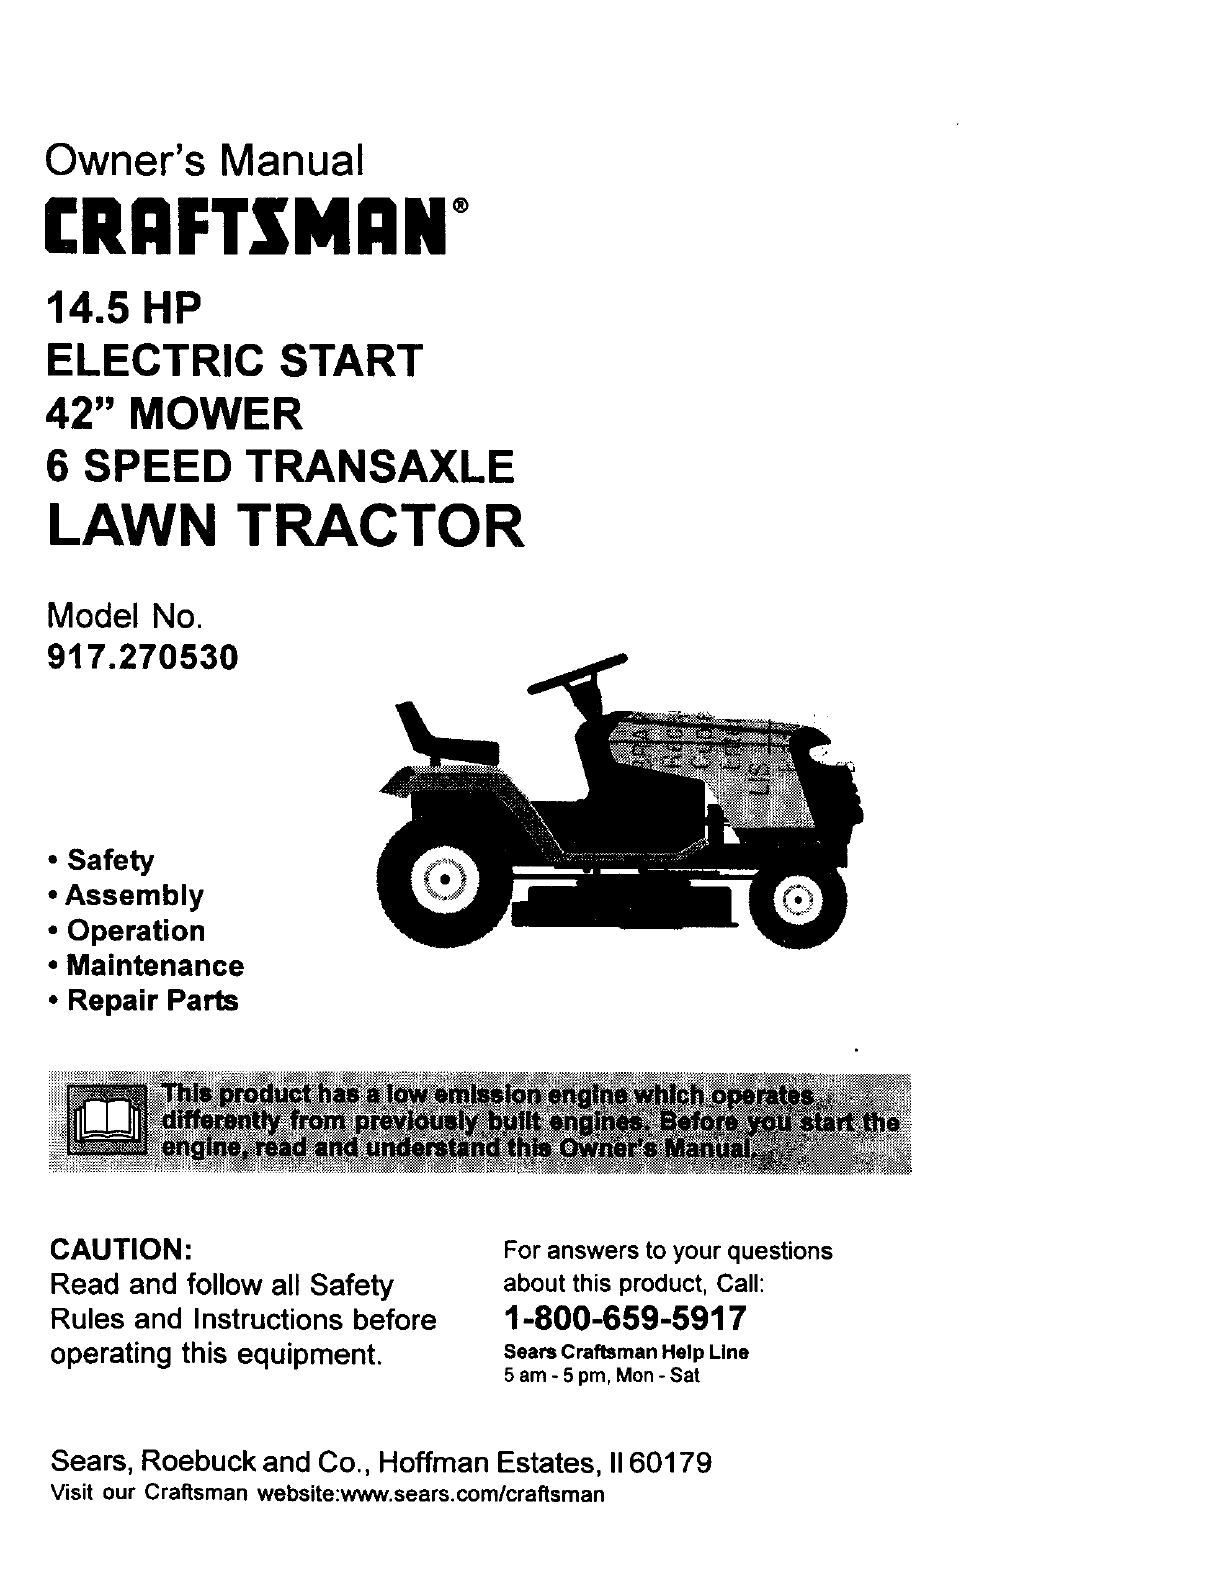 Craftsman 917270530 User Manual 14 5hp 42 Mower Lawn Tractor Manuals And Guides L0020132